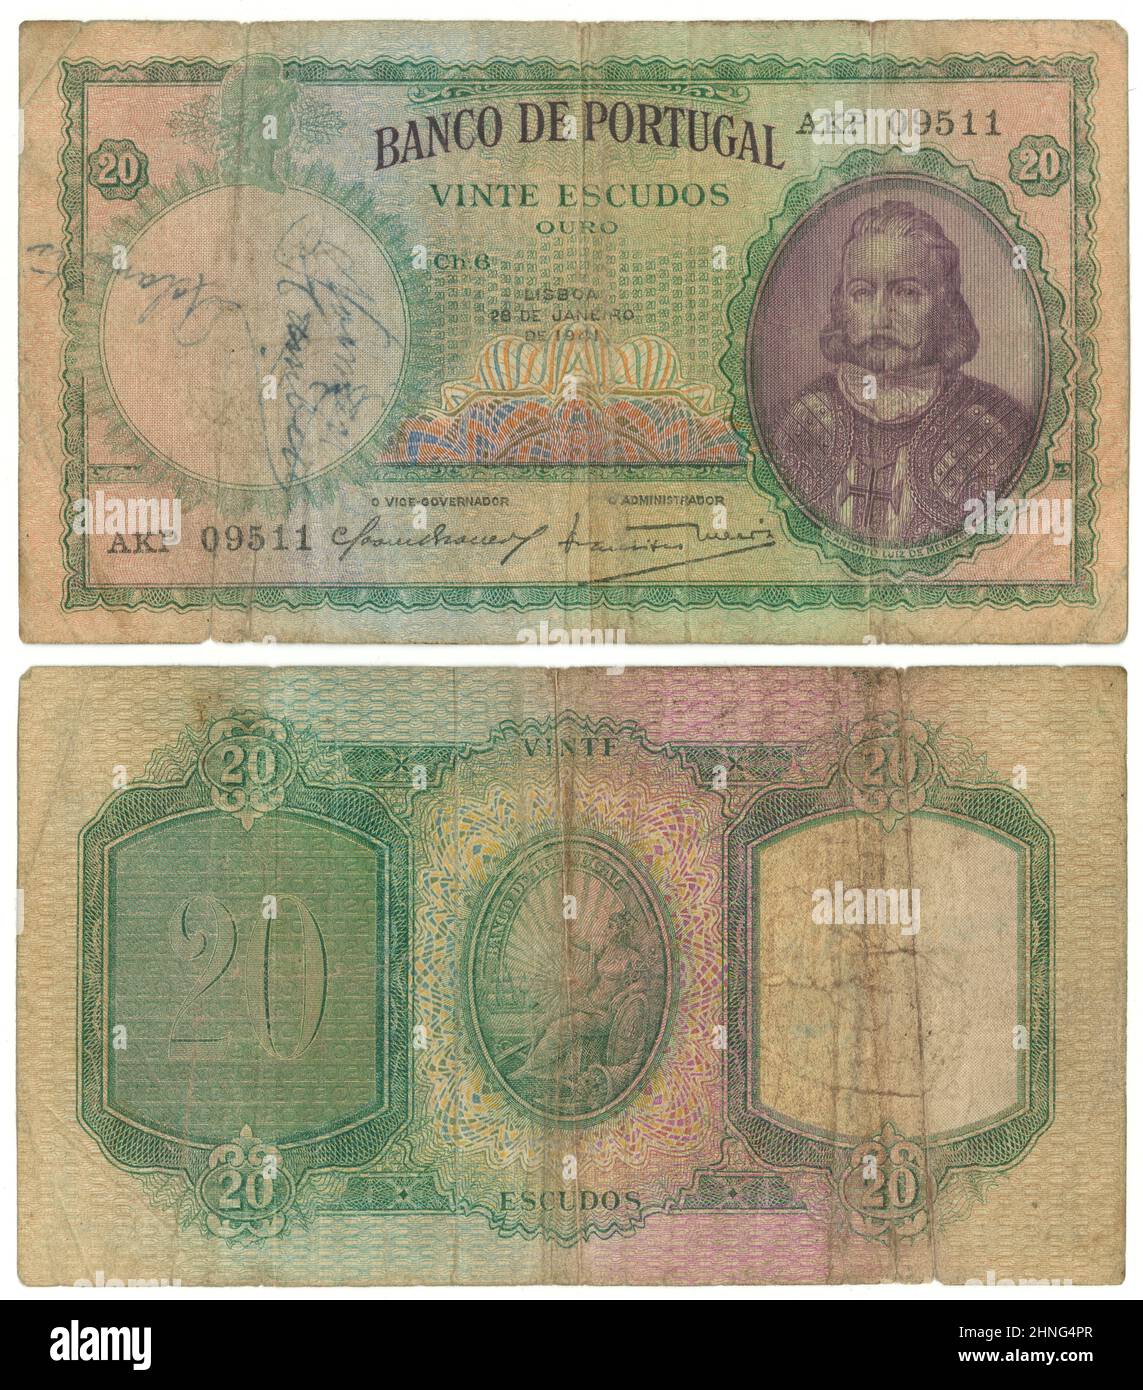 1941, Twenty Escudos note, Portugal, obverse and reverse. Actual size: 135mm x 75mm. Stock Photo